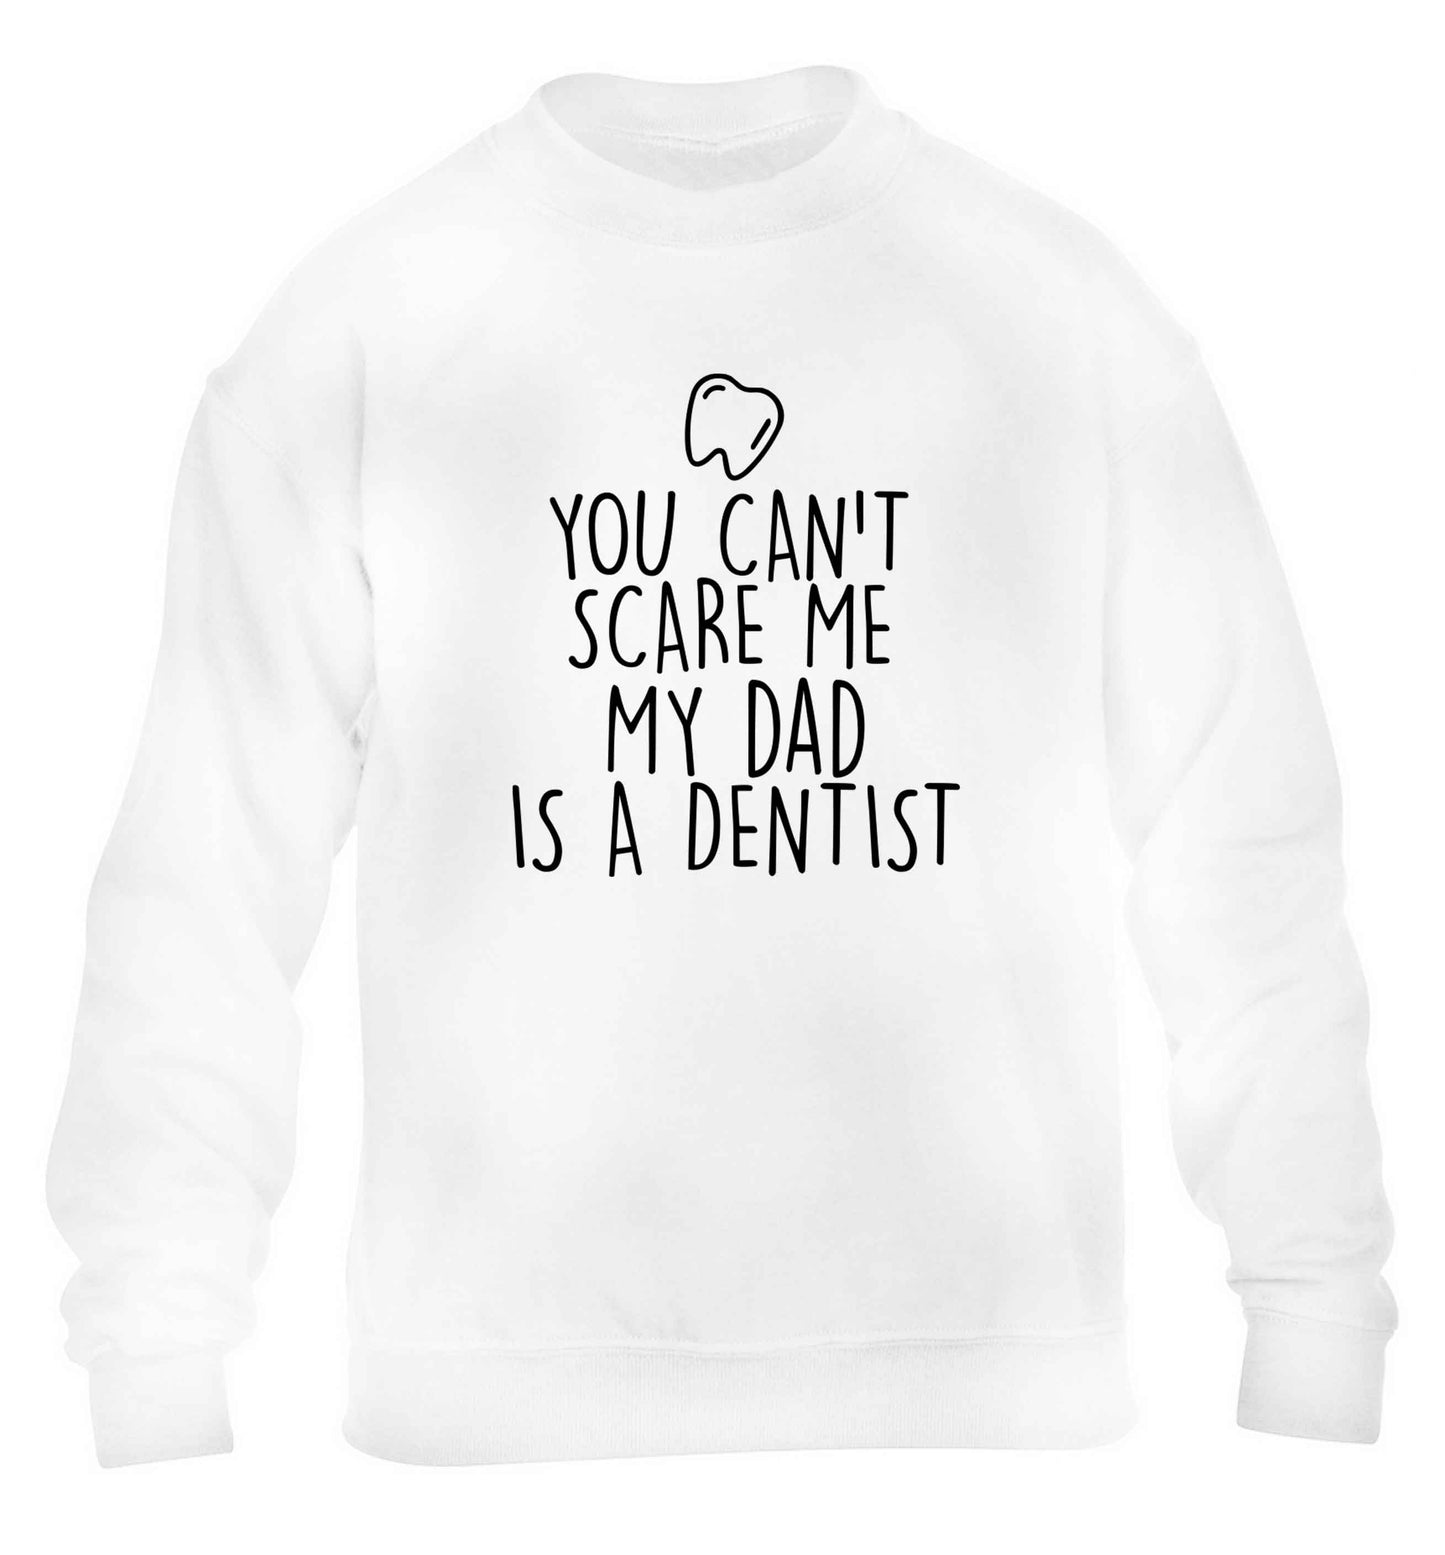 You can't scare me my dad is a dentist children's white sweater 12-13 Years